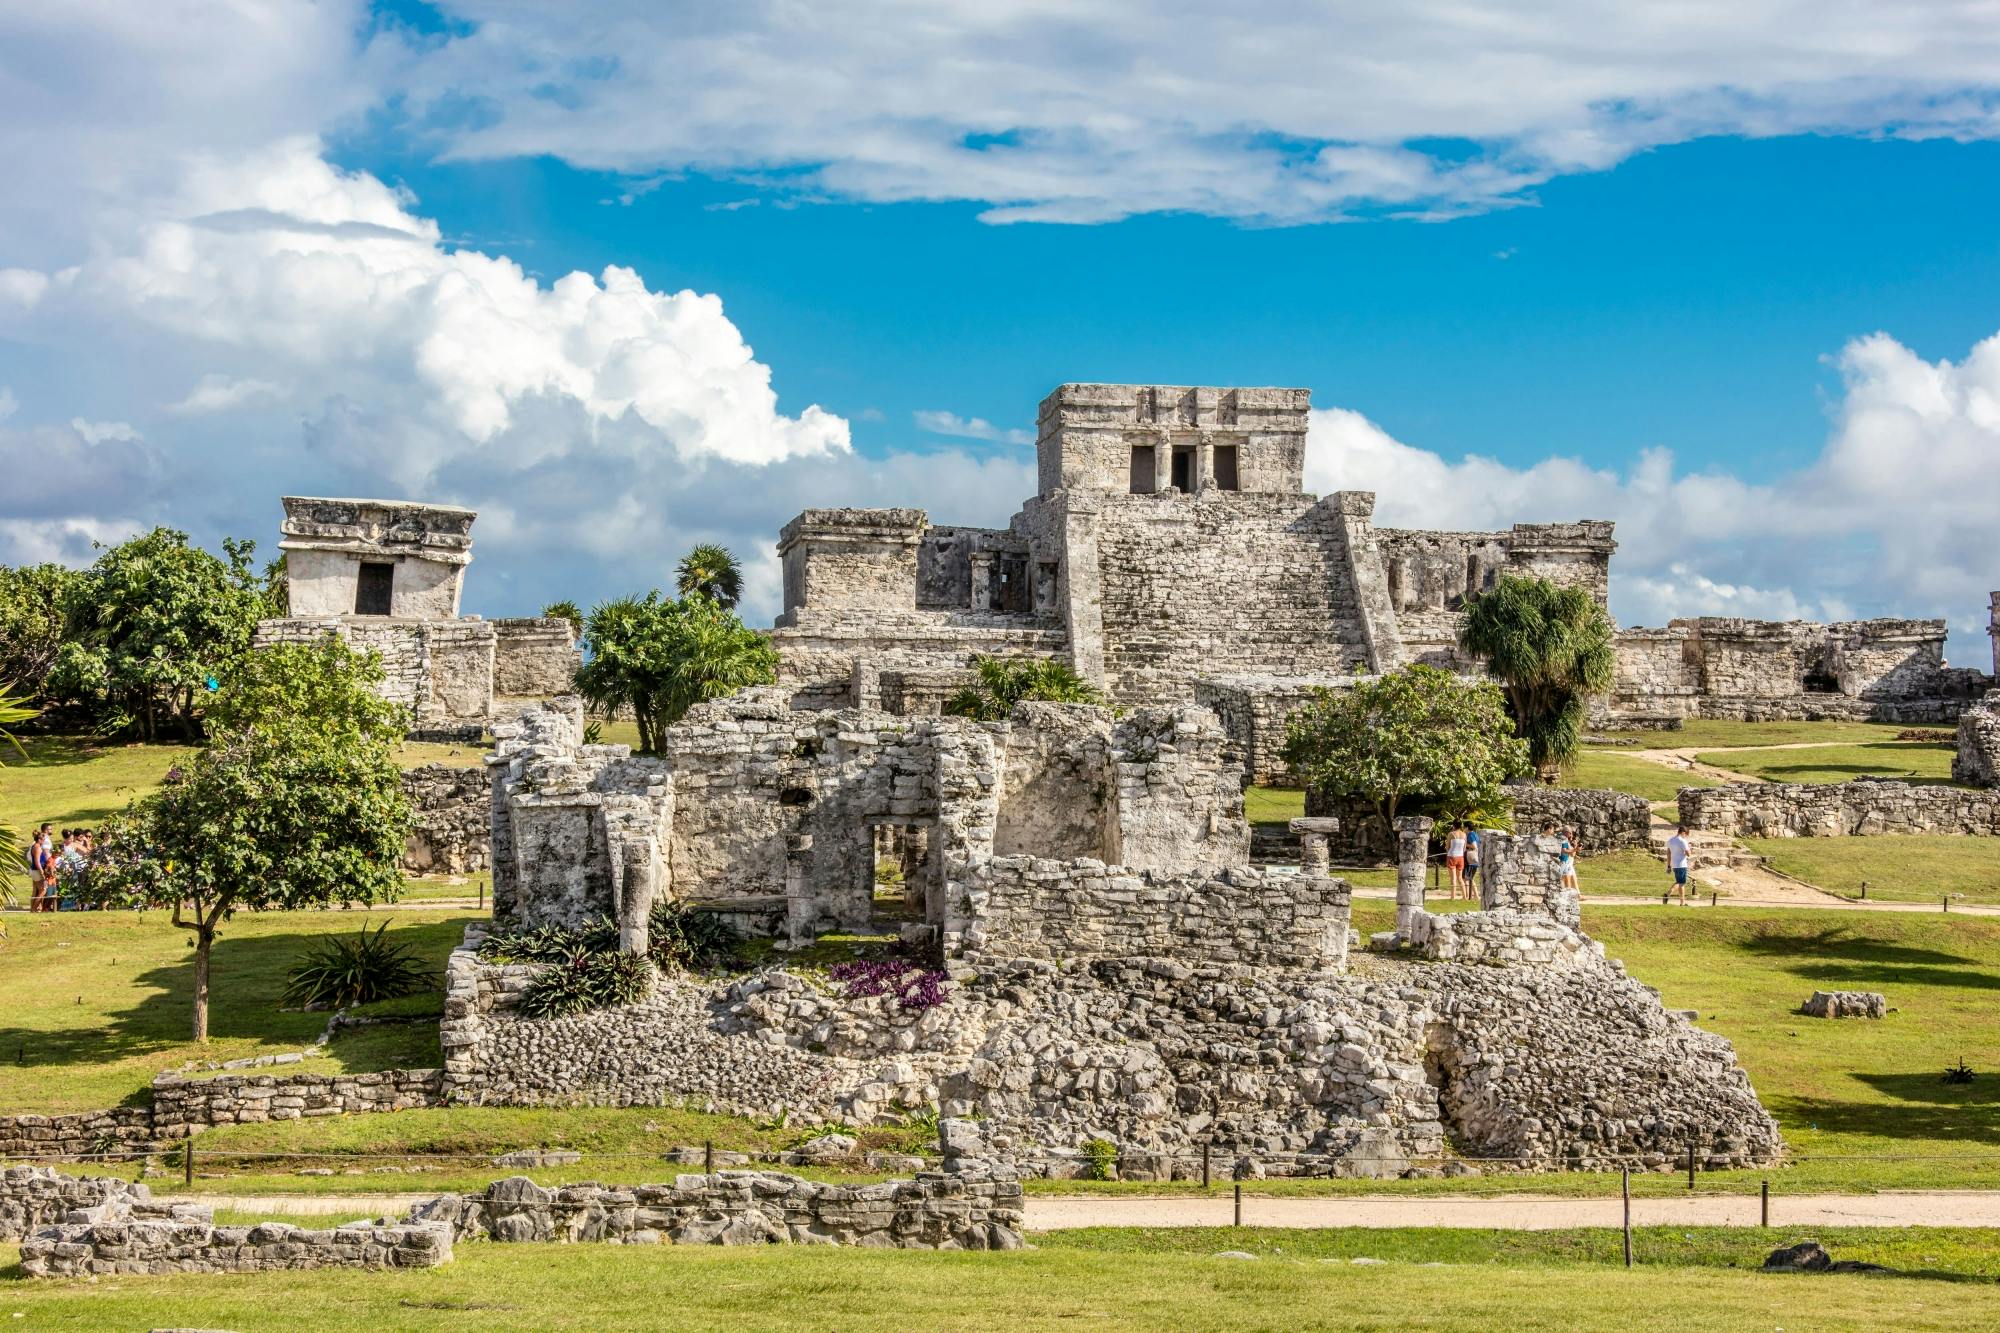 Guided Tour of Tulum and Visit to a Modern Maya Community